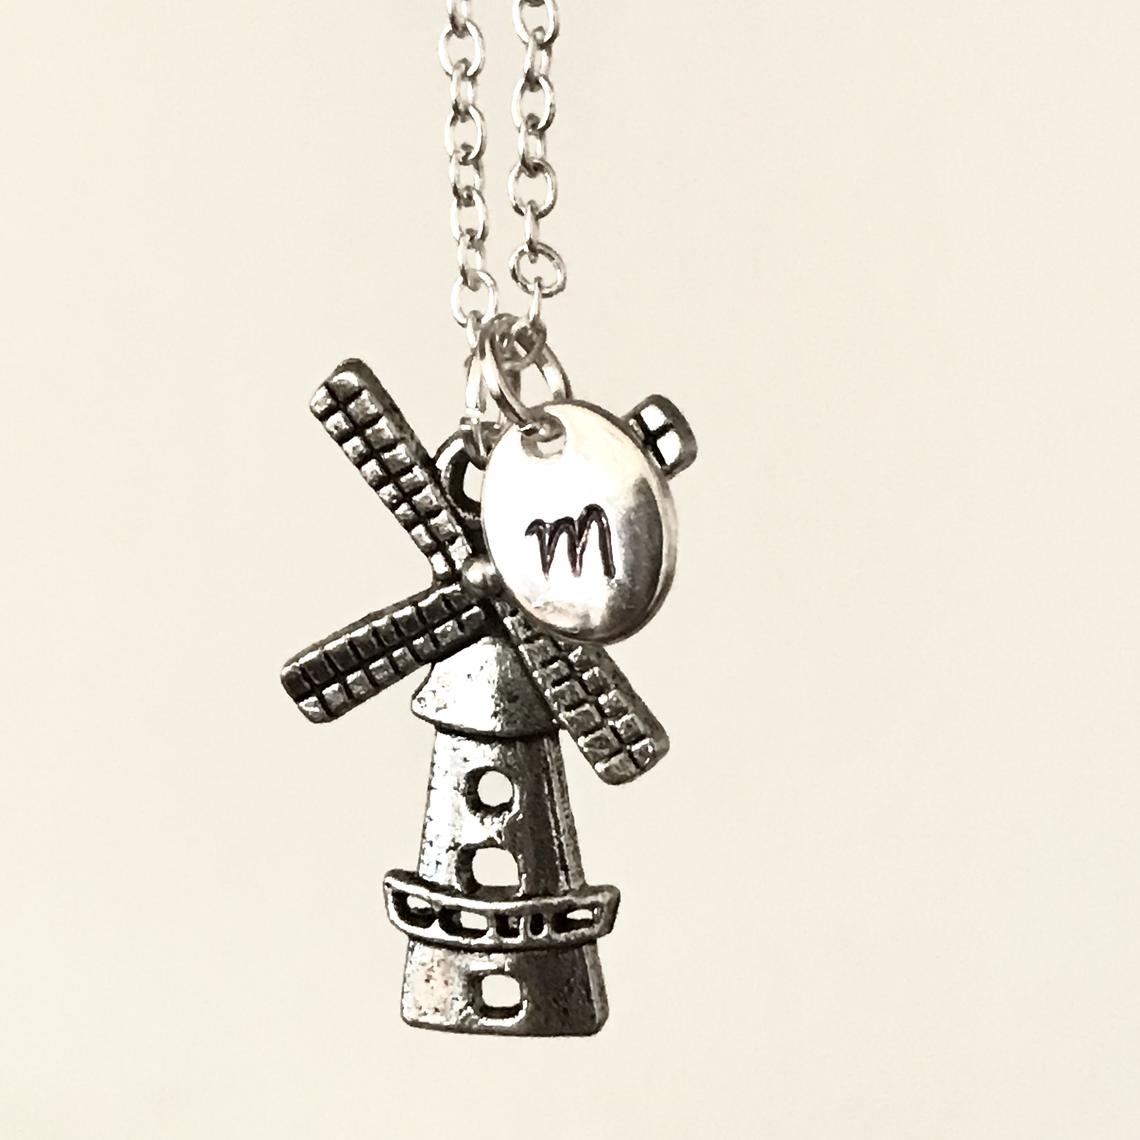 Personalized silver windmill necklace with initial charm, Best friend necklace